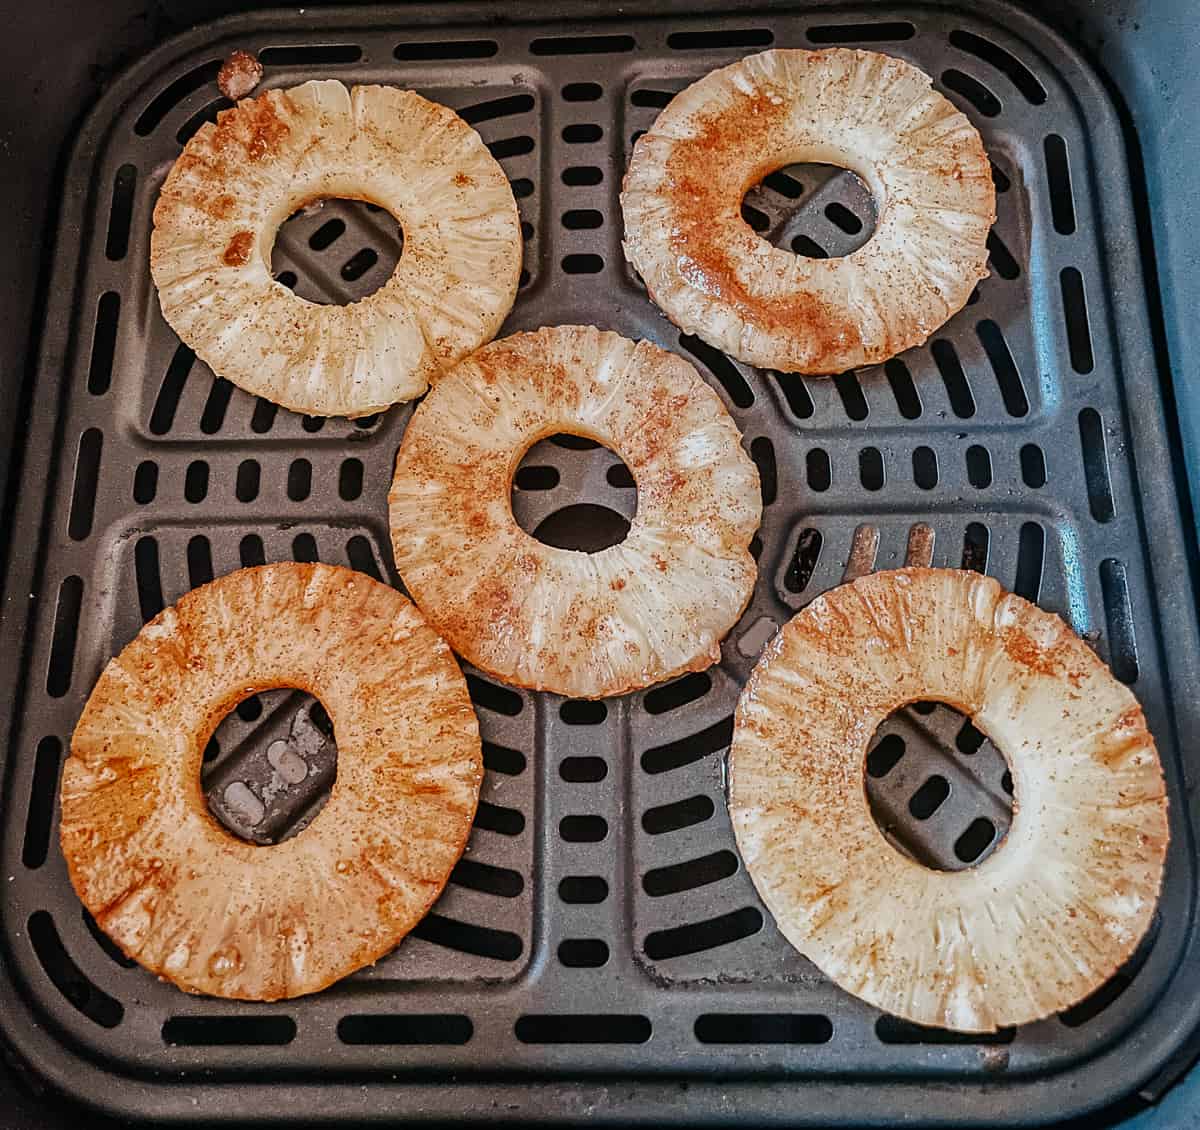 pineapple rings topped with brown sugar mixture in the basket of an airy fryer